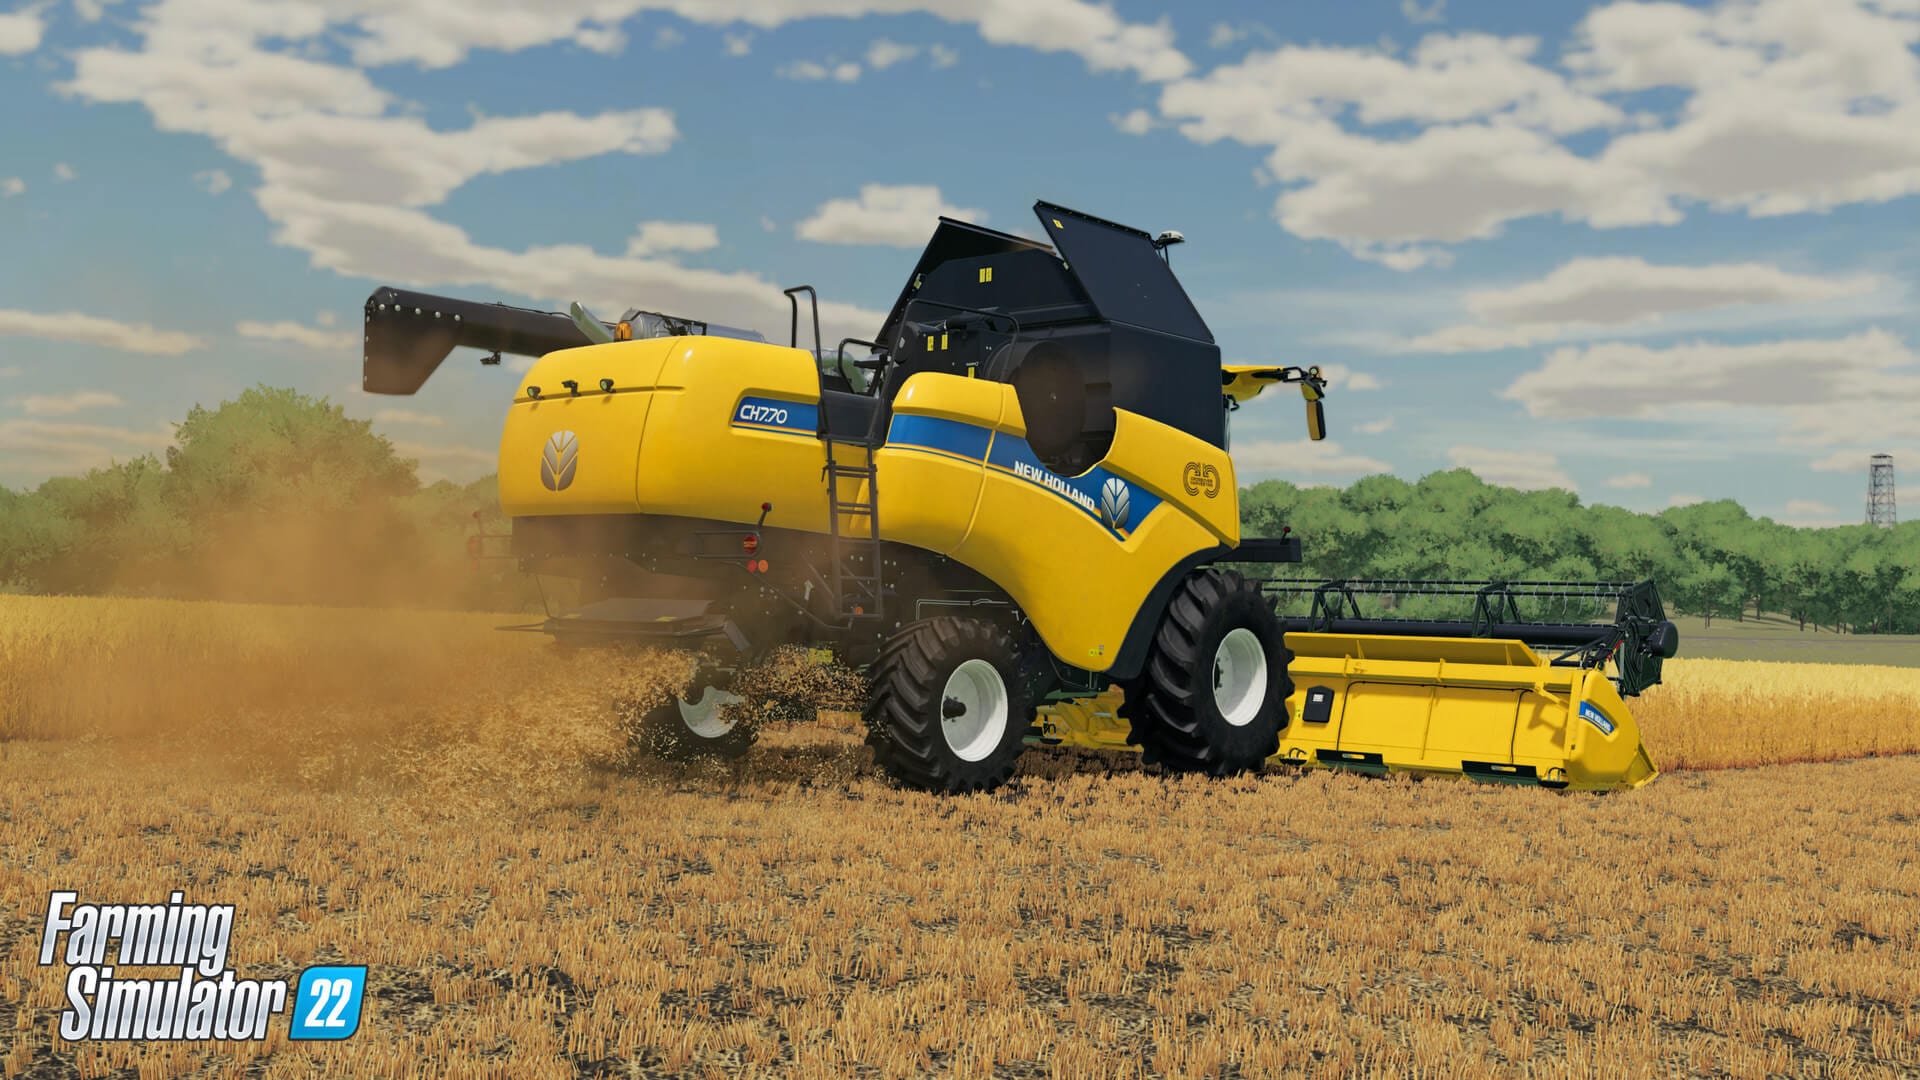 Farming Simulator 22 Plows Its Way to PC & Consoles Later This Year